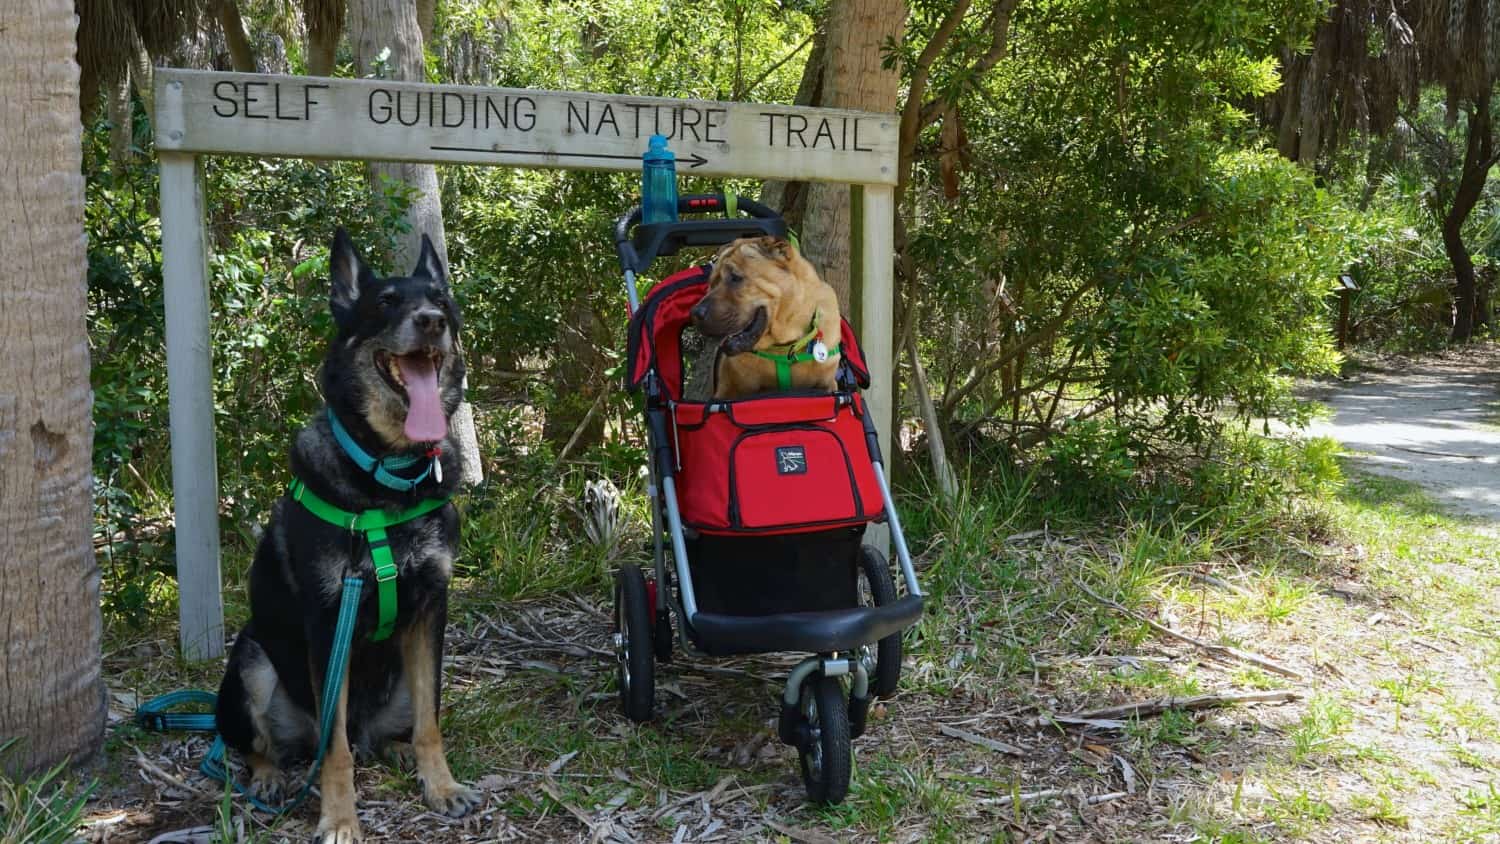 Florida's Top Pet Friendly Attraction: Fort De Soto Park and Dog Beach | GoPetFriendly.com